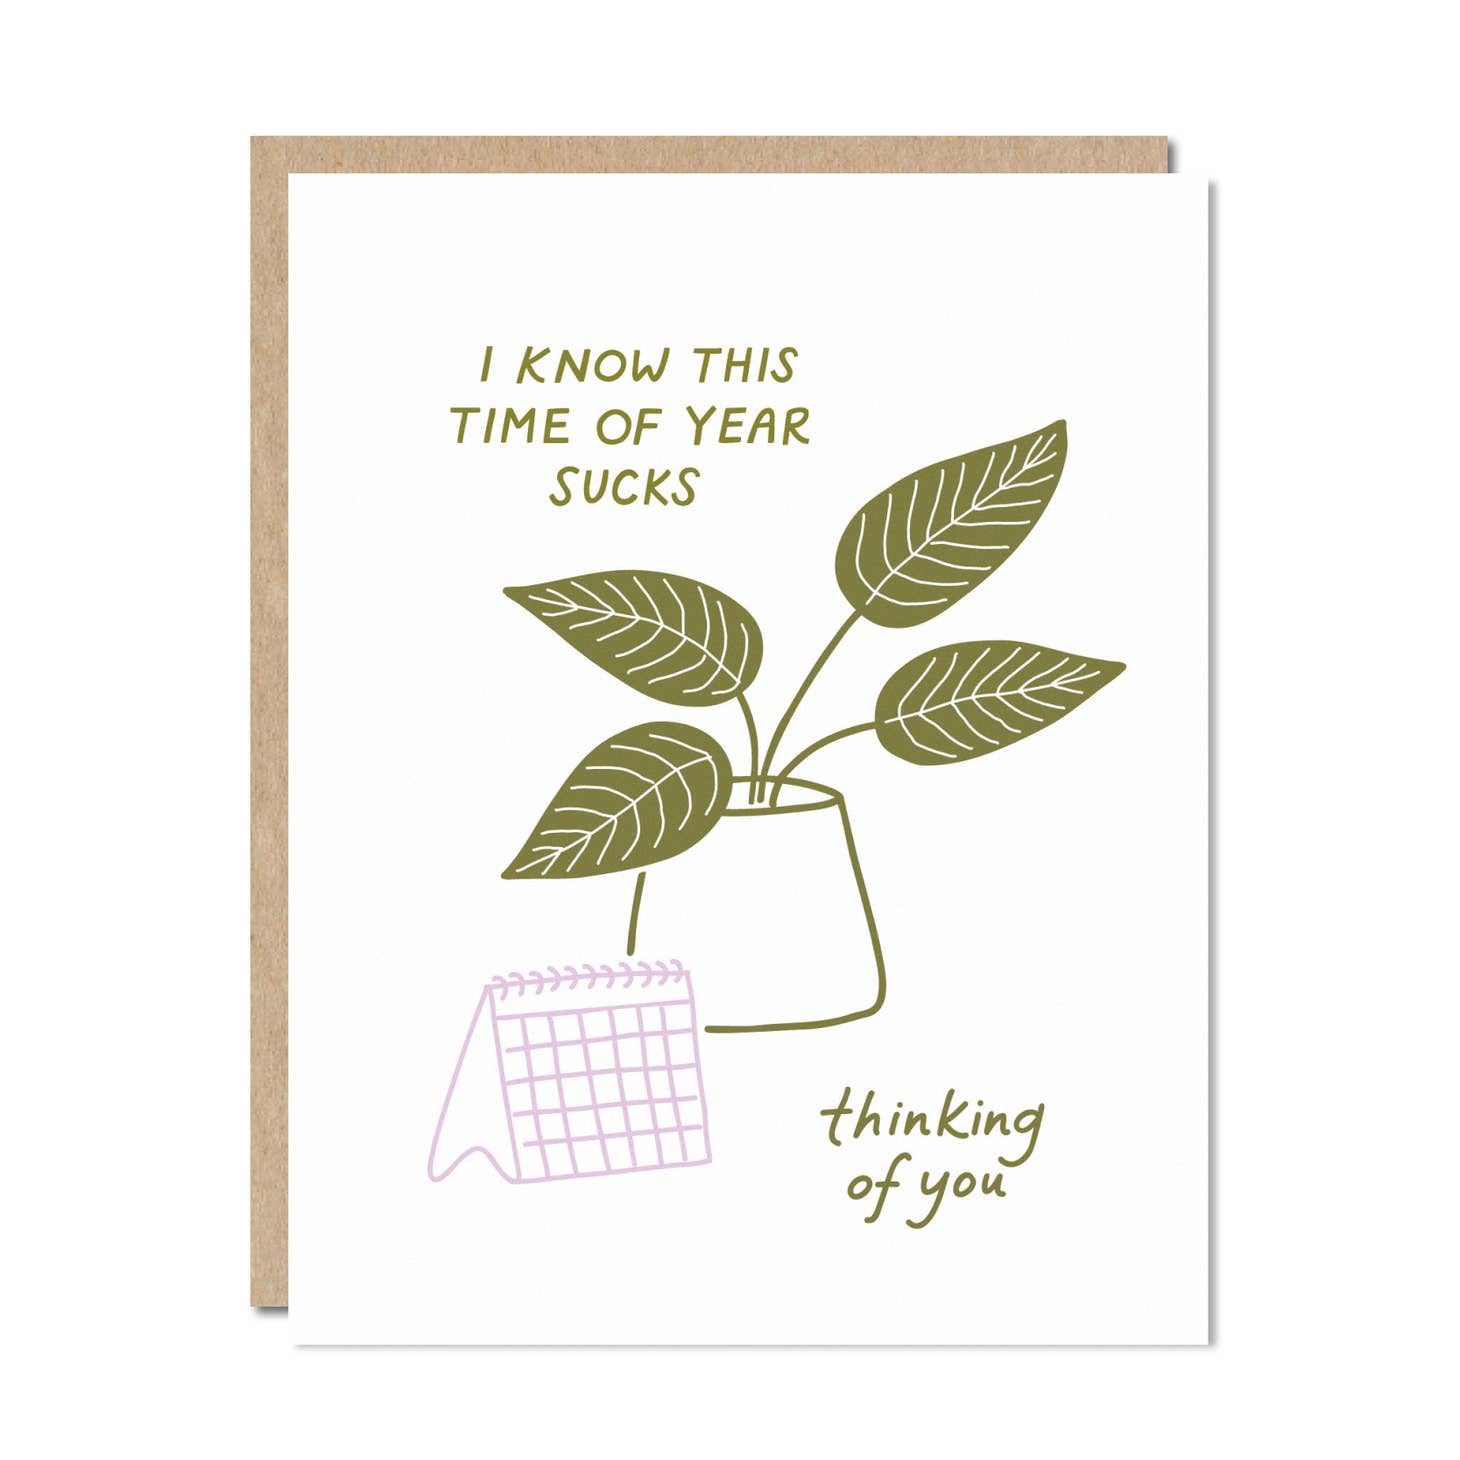 White background with image of a plant and calendar with olive green text says, "I know this time of year sucks" and "thinking of you". Kraft envelope included. 